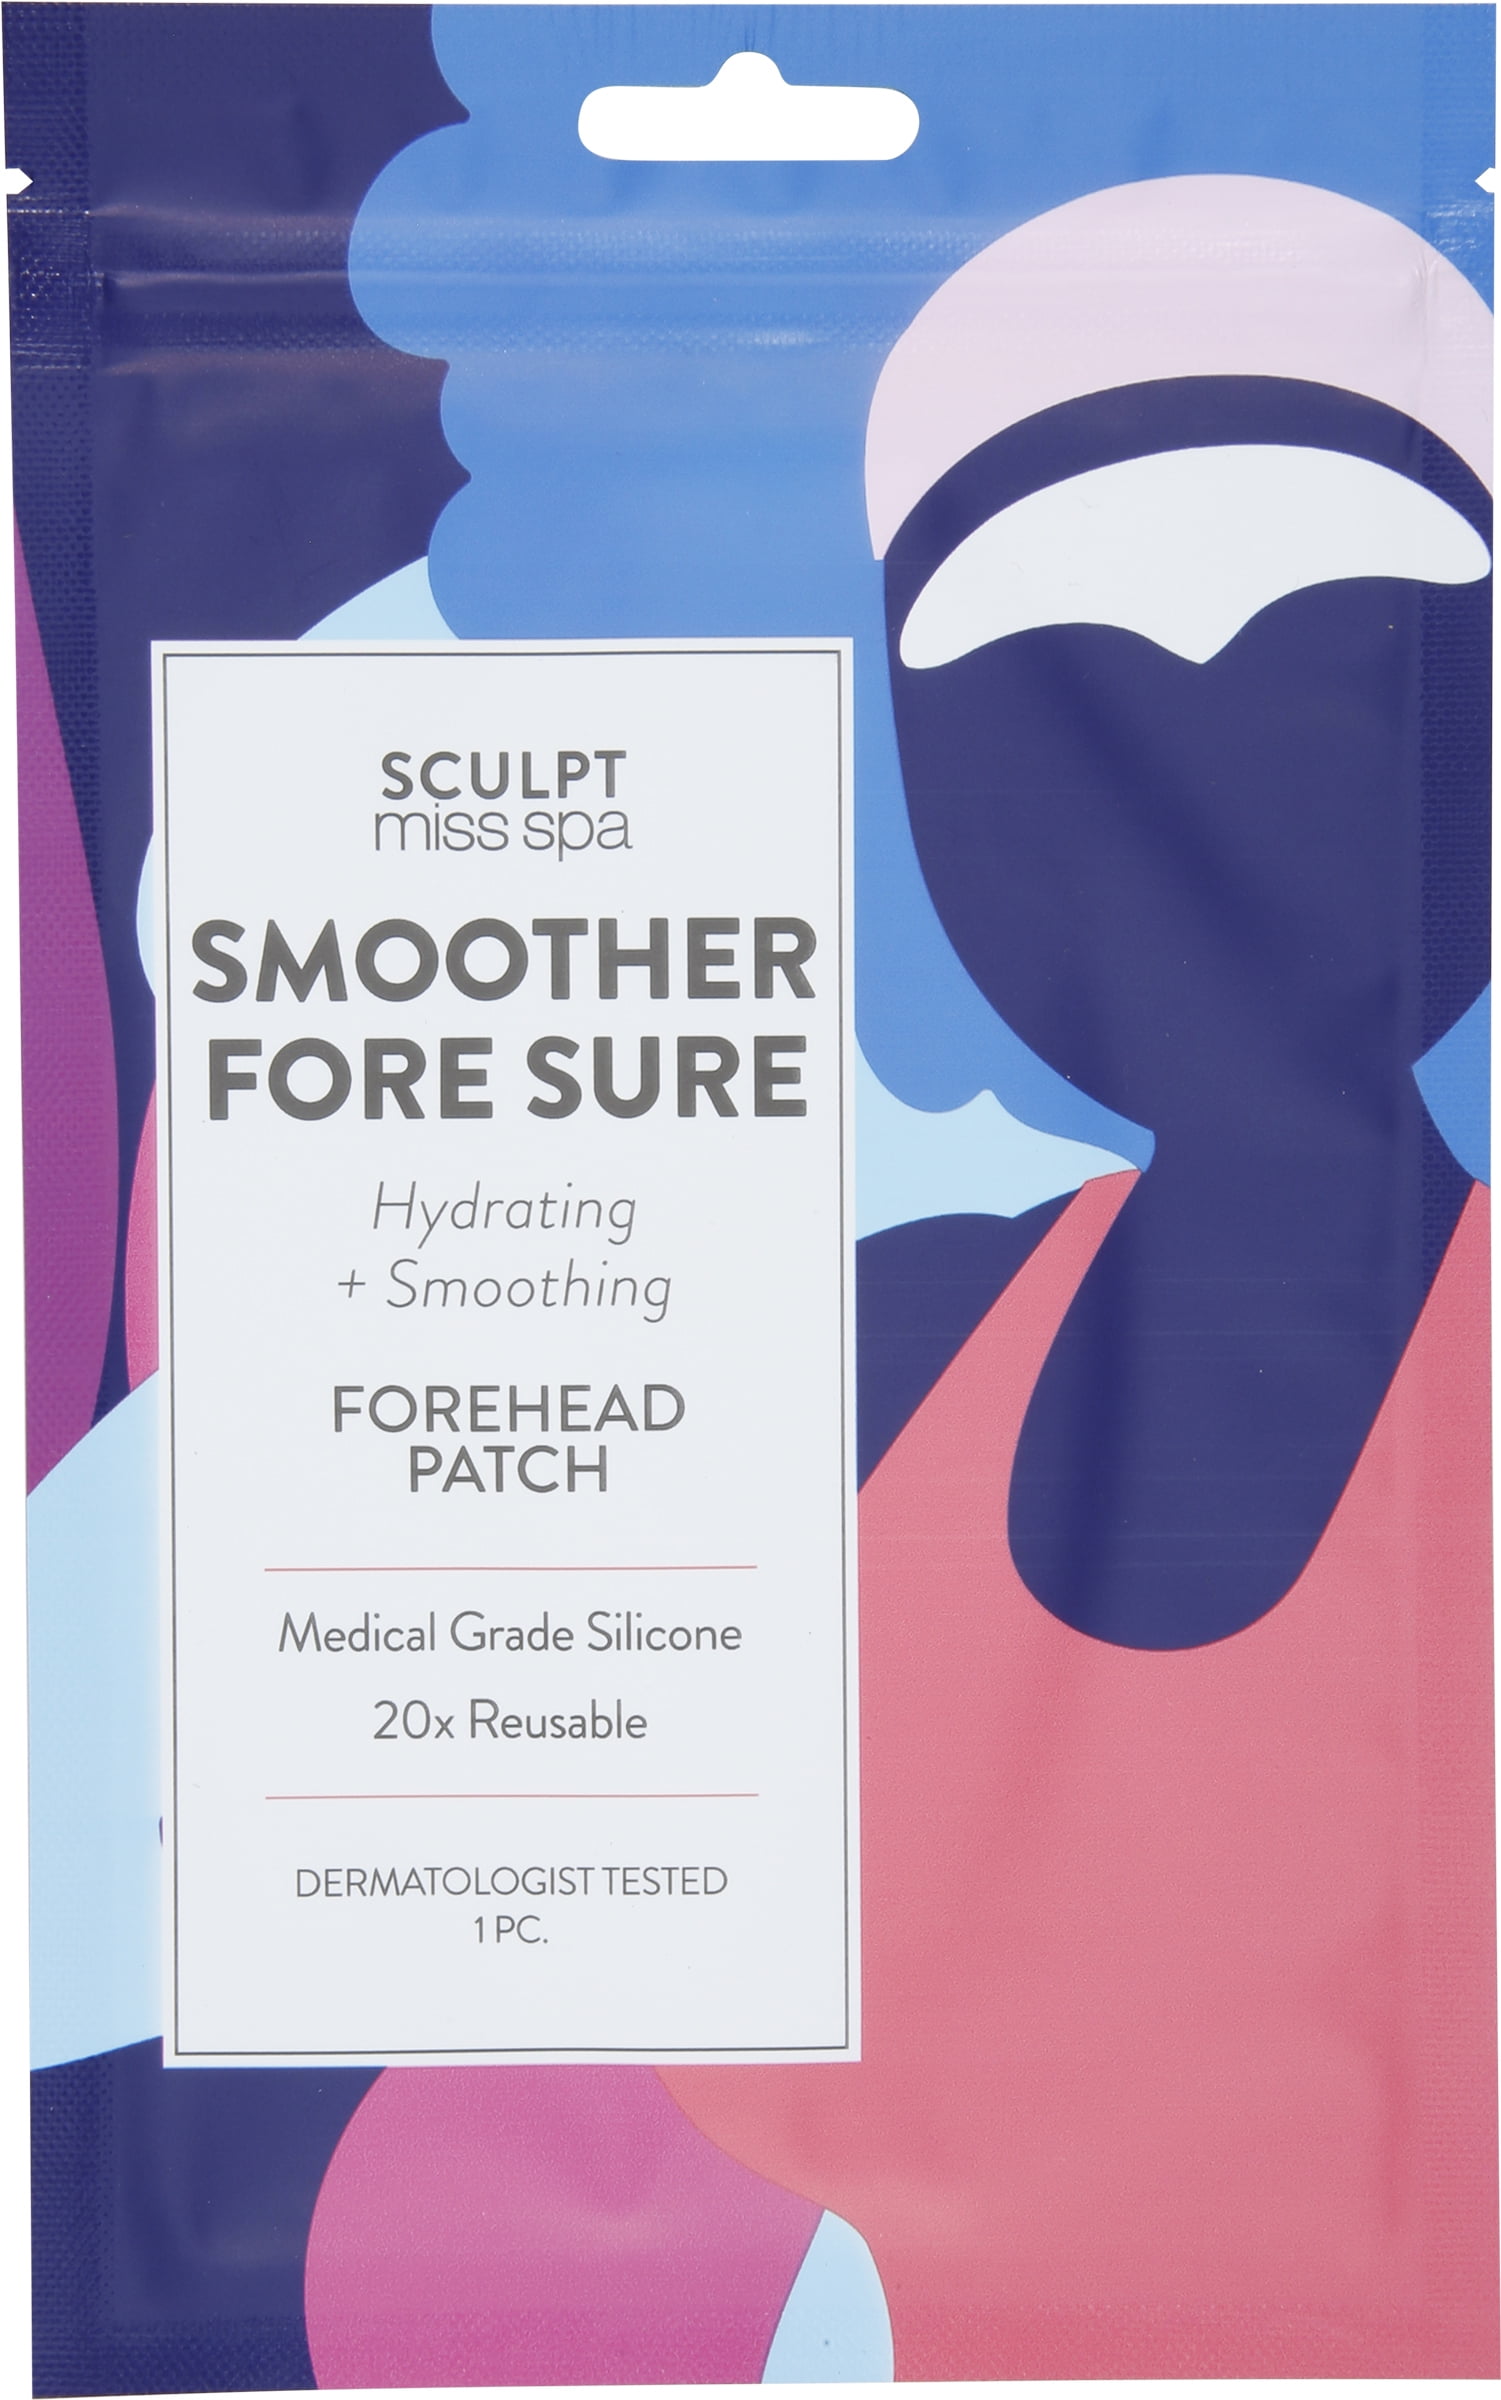 Miss Spa Sculpt Smoother Fore Sure Forehead Patch